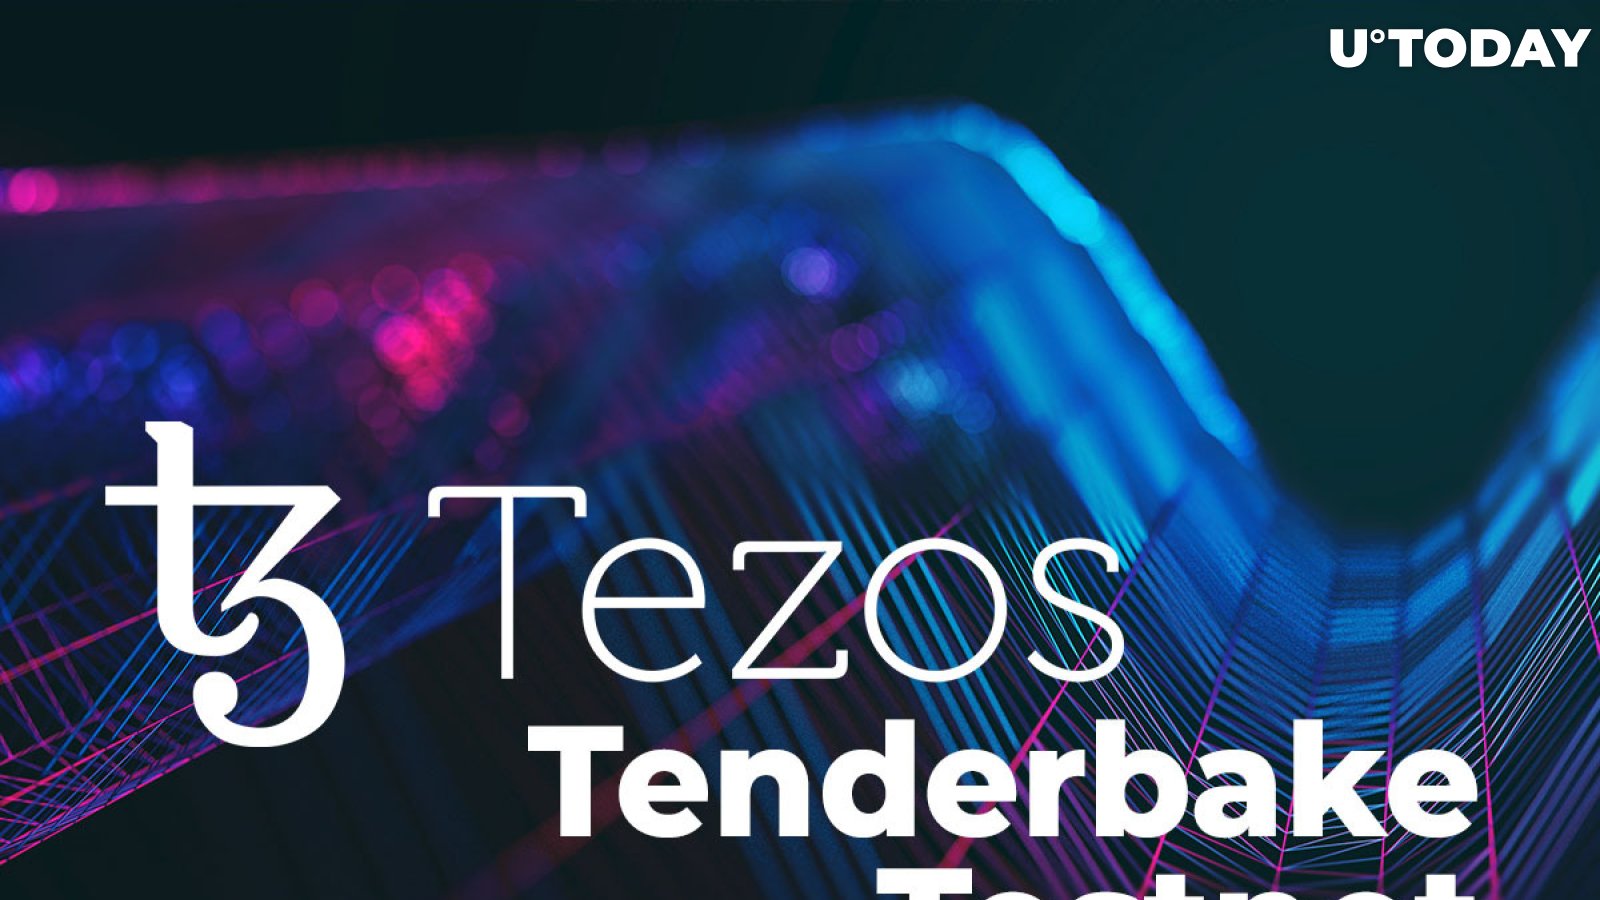 Tezos (XTZ) Introduces Tenderbake Testnet Consensus. Why Is It Called "The Biggest on the Horizon?"